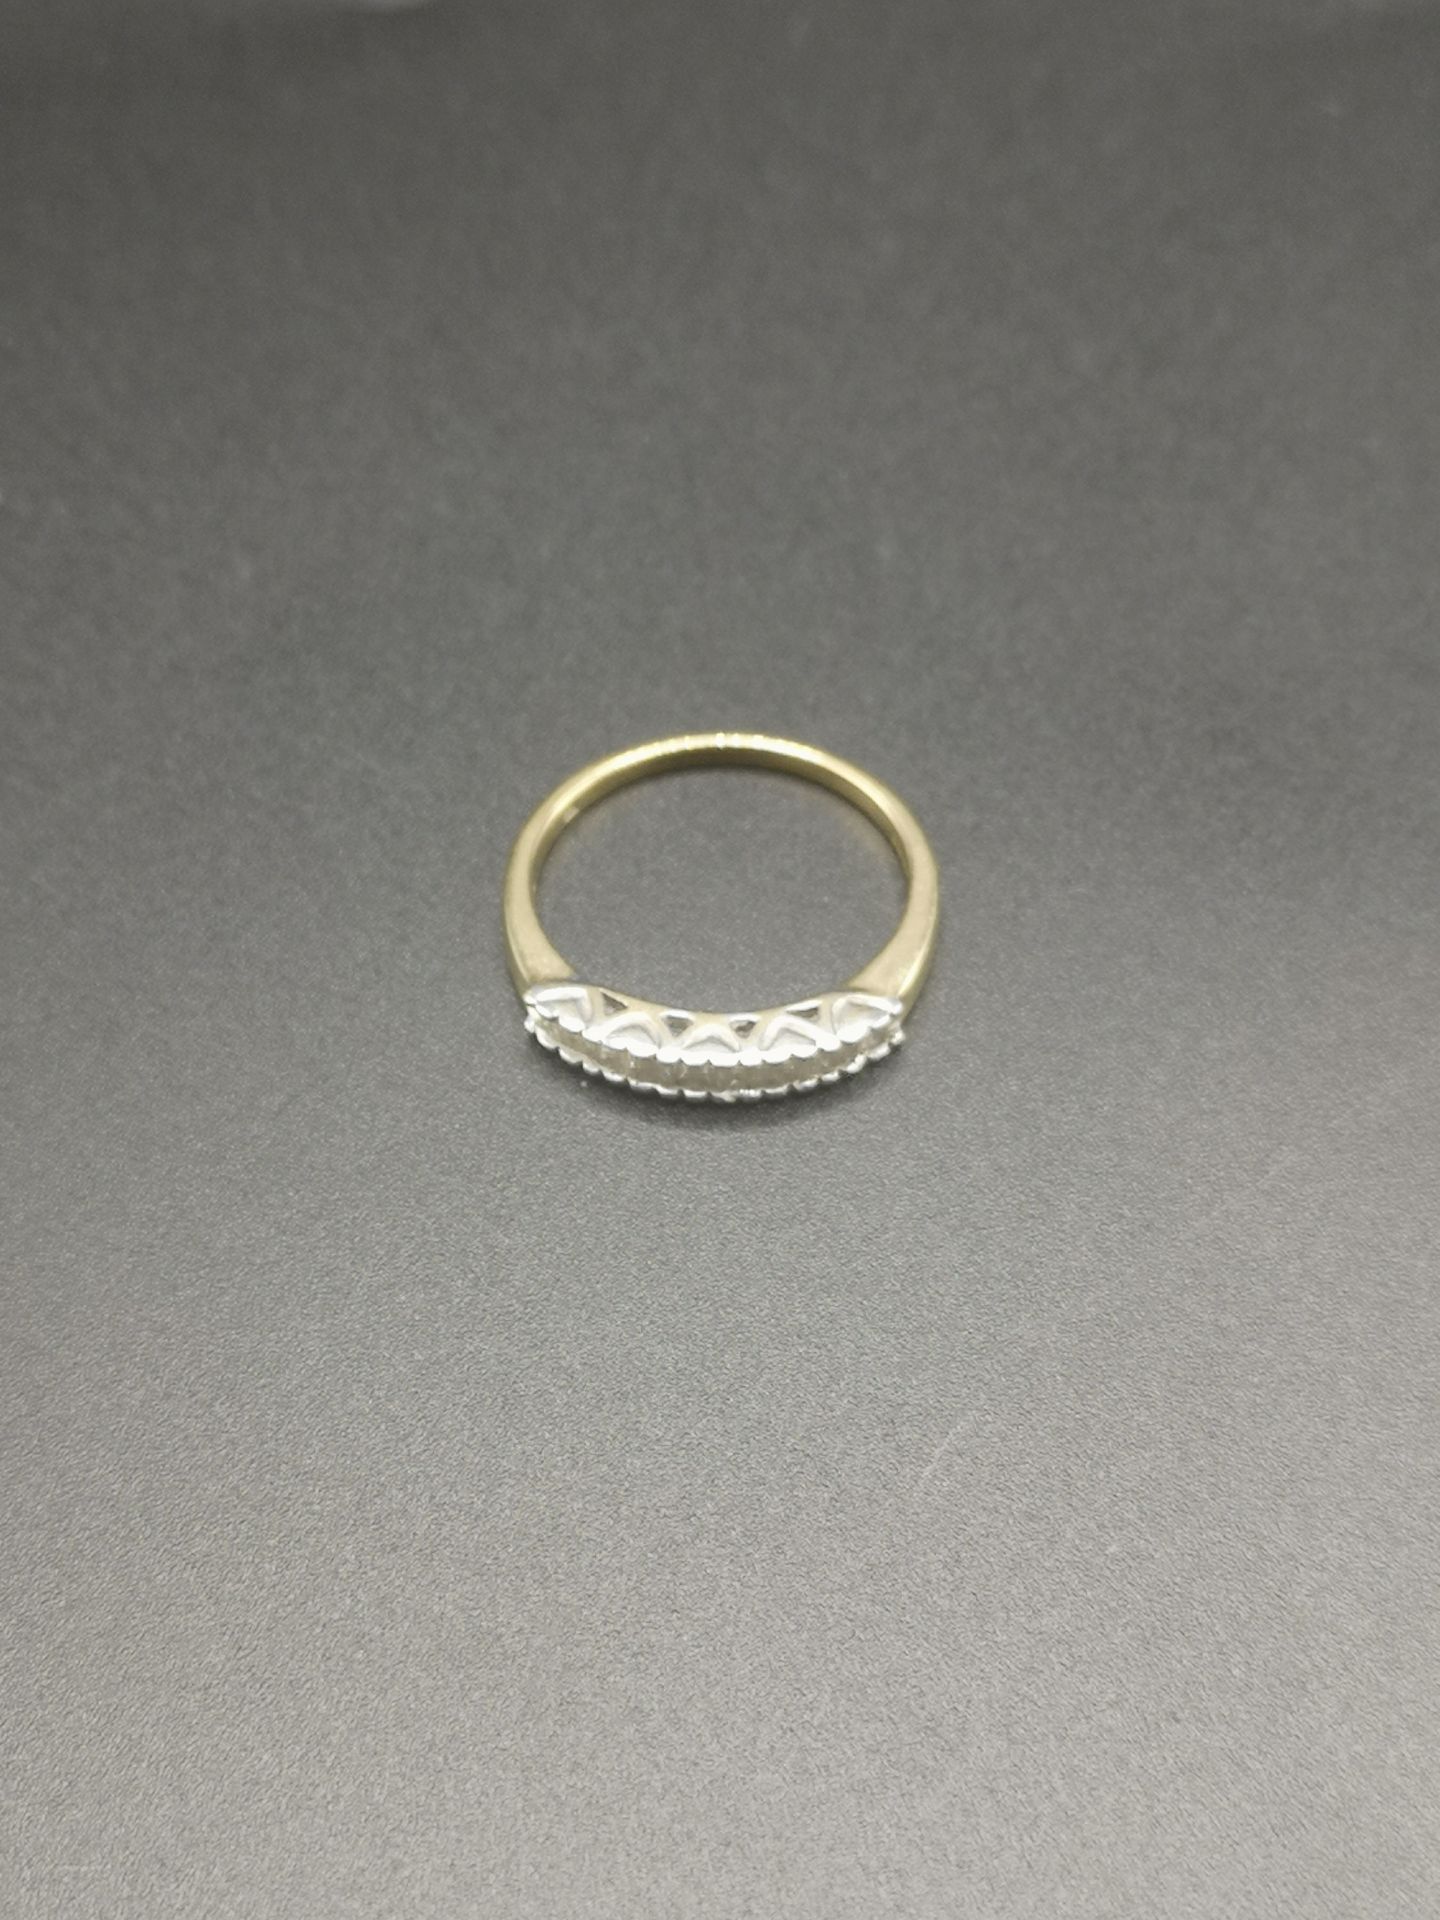 9ct gold ring with channel set diamonds - Image 5 of 5